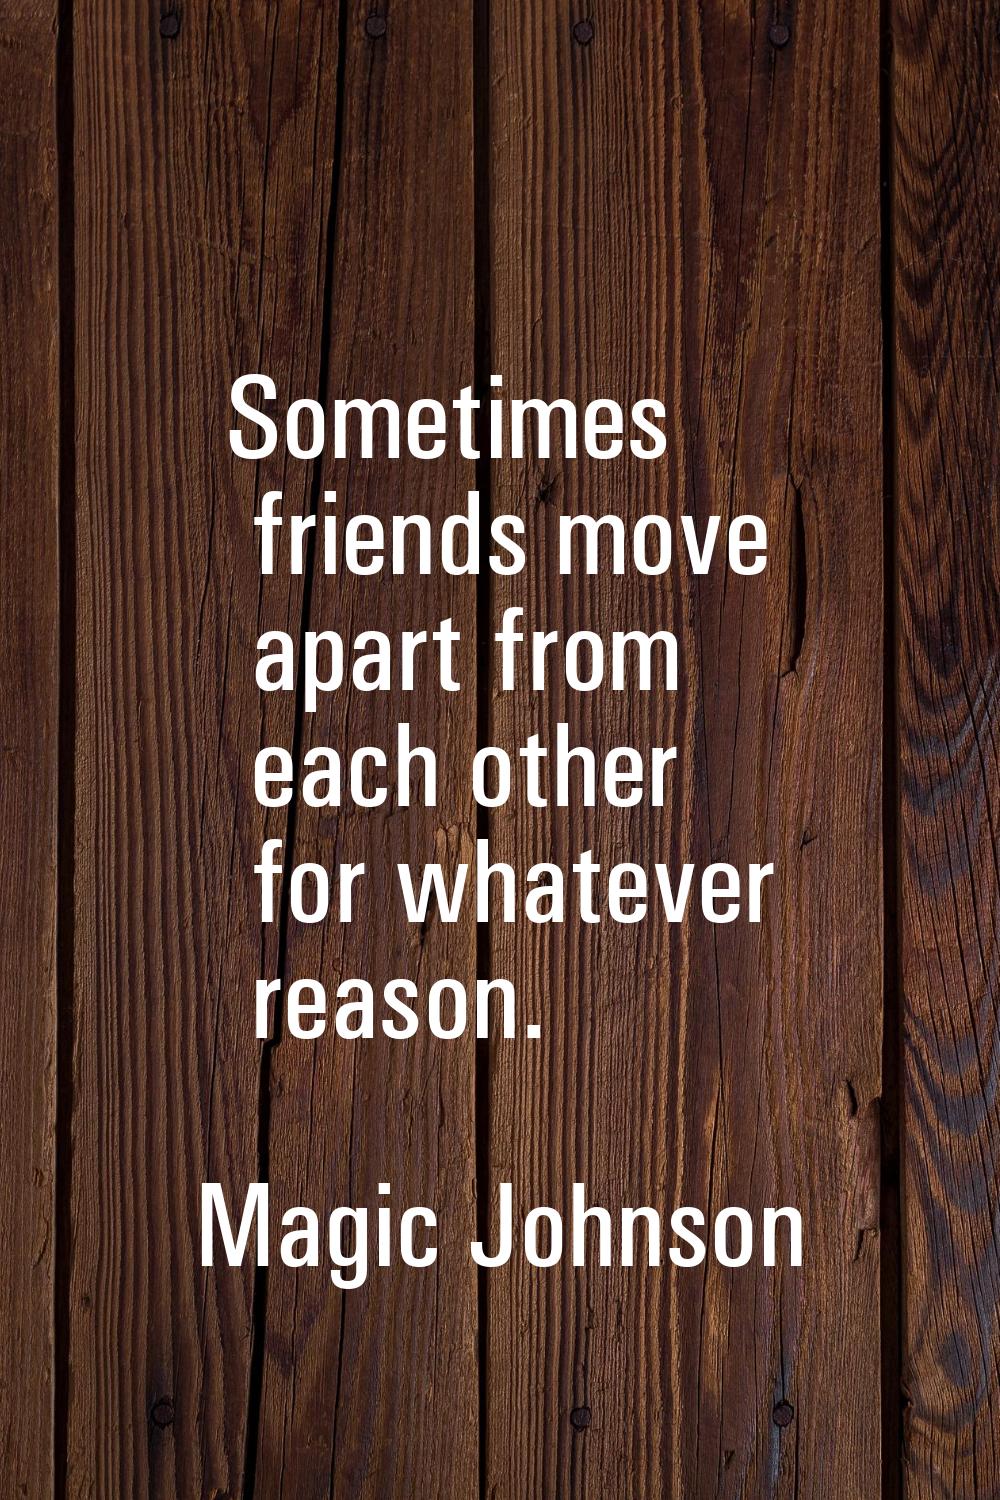 Sometimes friends move apart from each other for whatever reason.